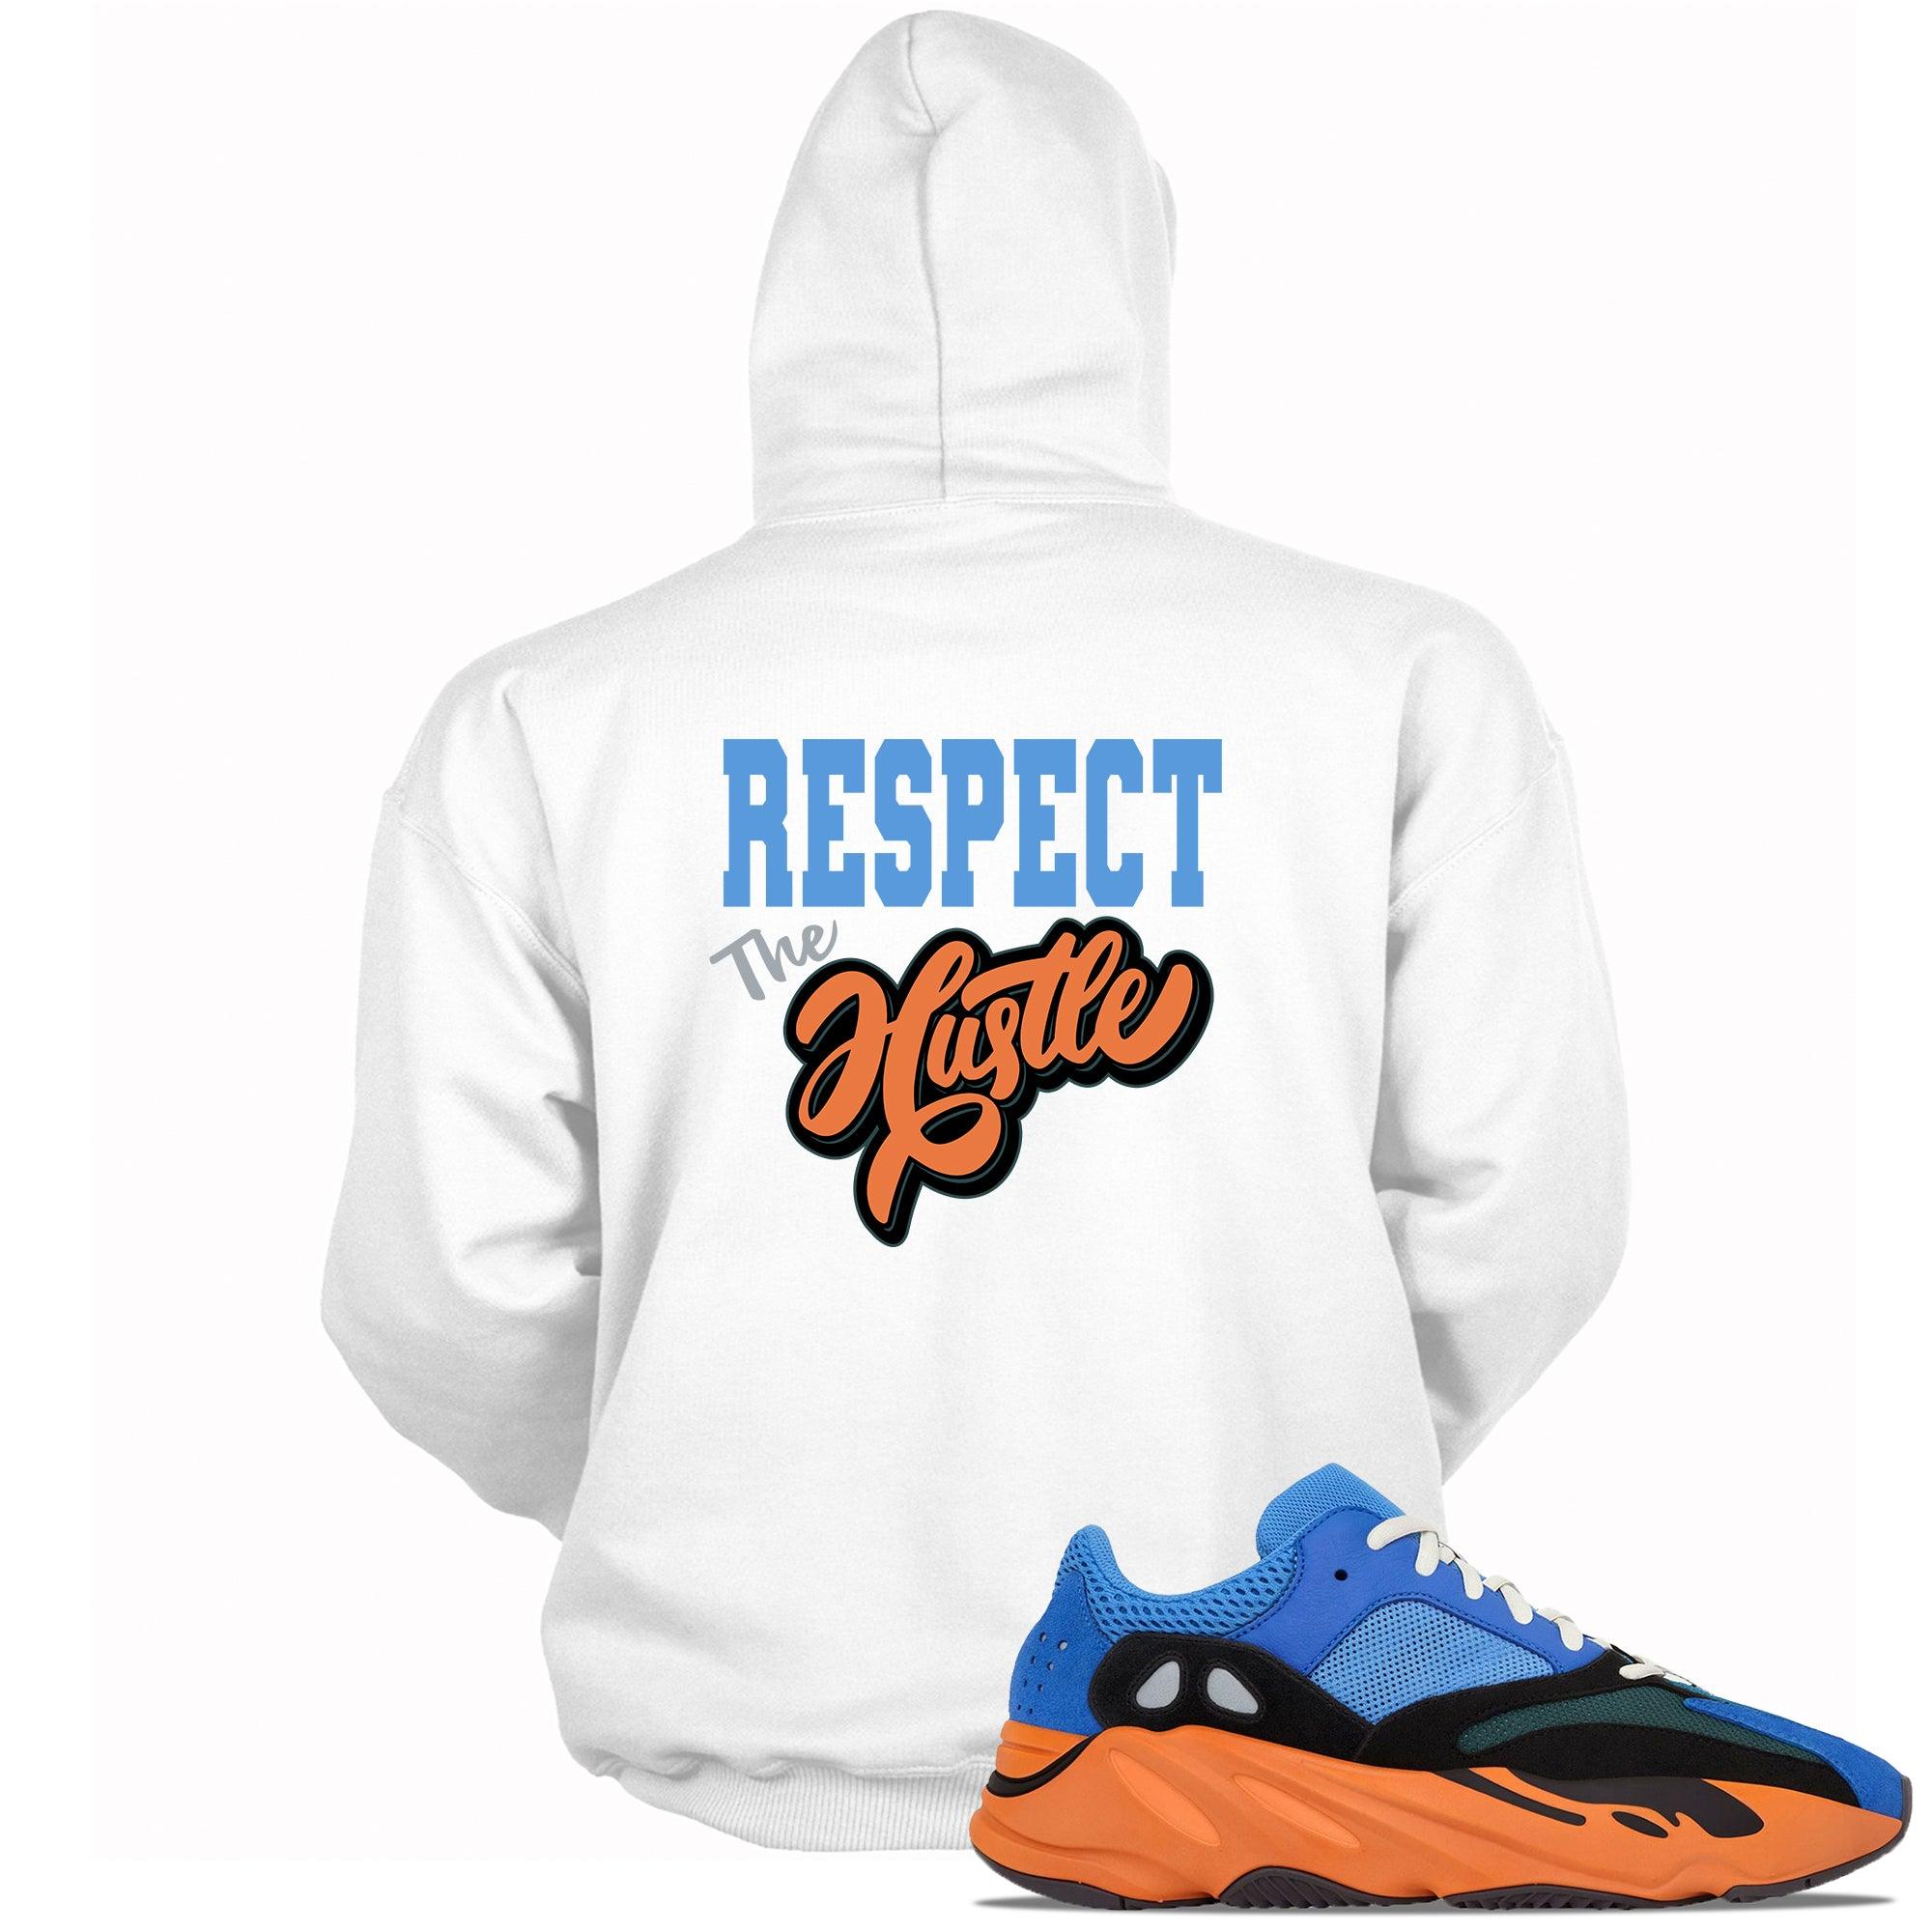 Respect The Hustle Hoodie Yeezy Boost 700s Bright Blue photo